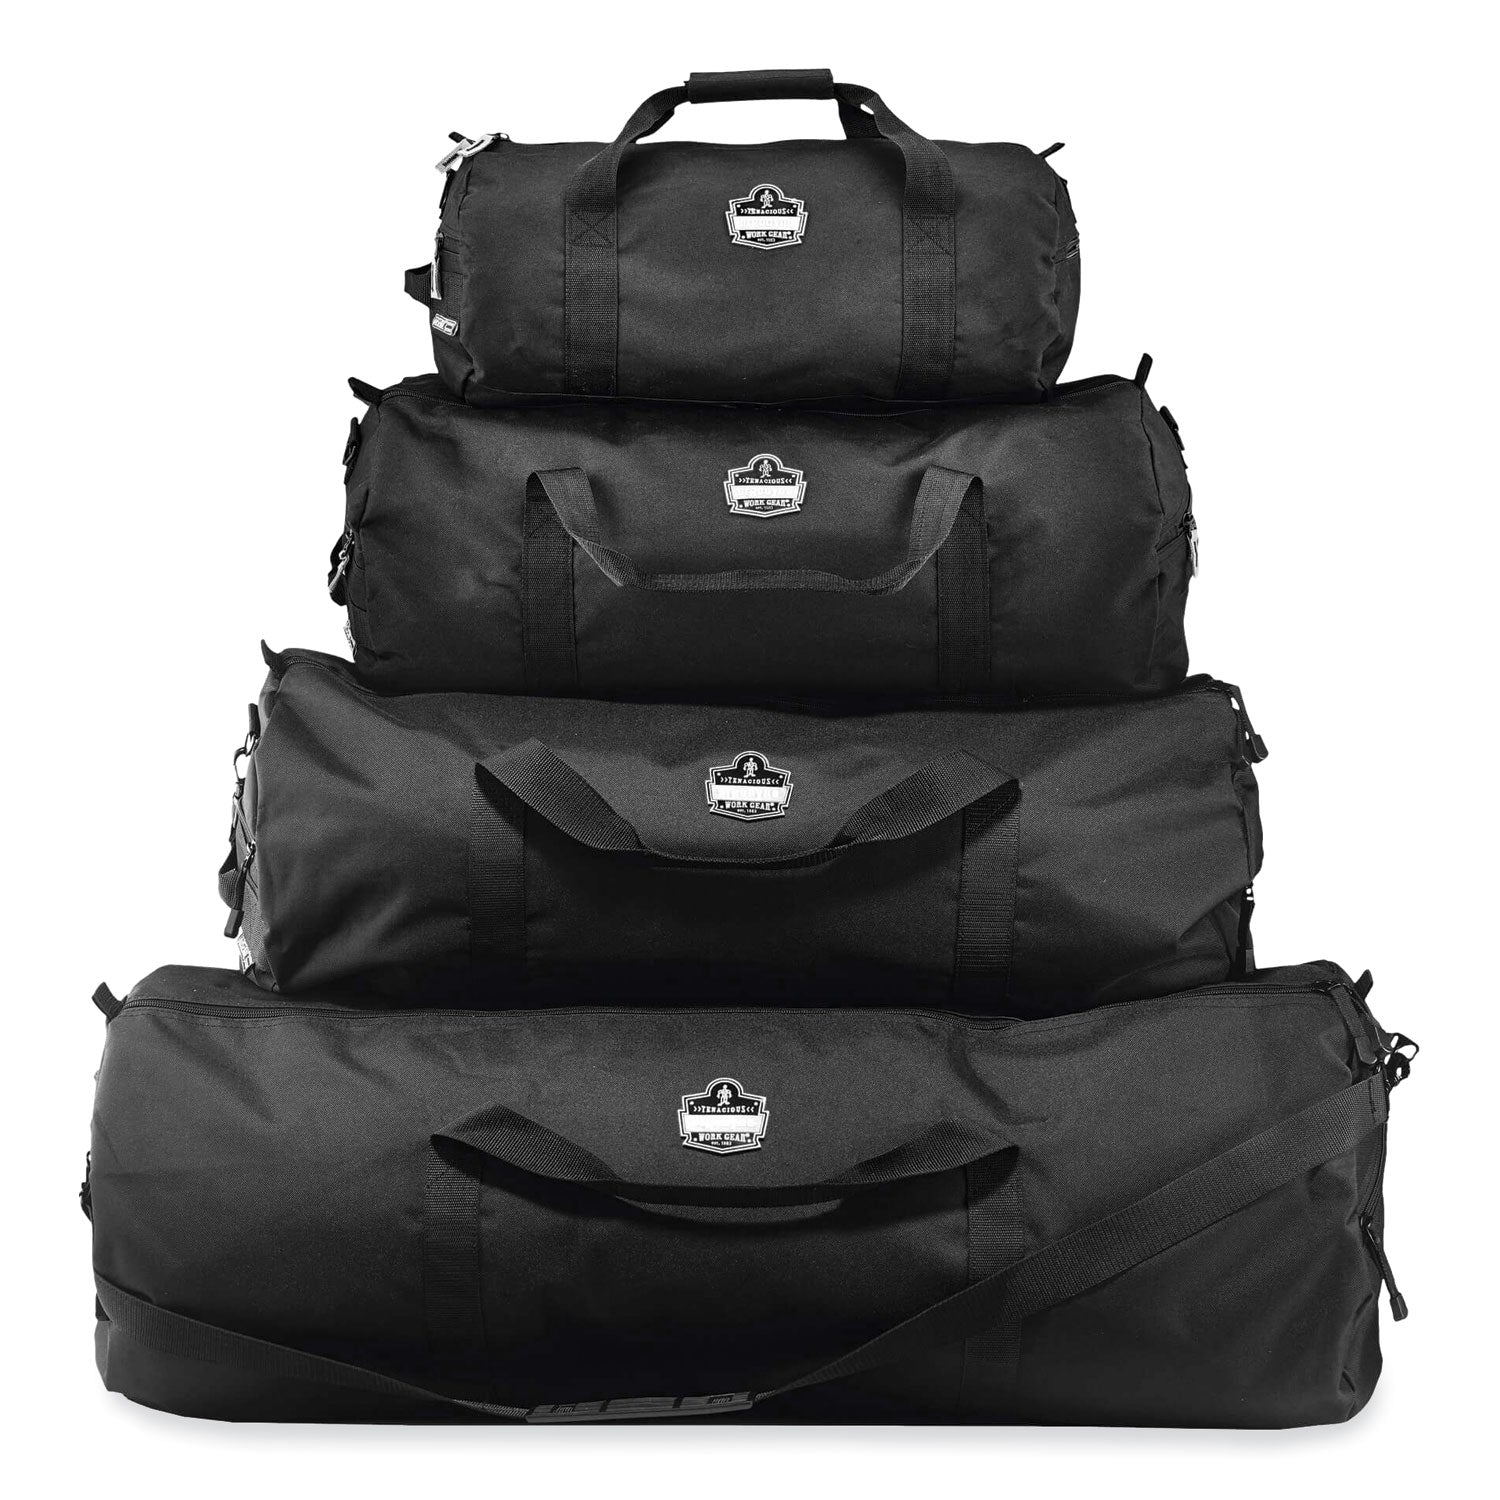 arsenal-5020p-gear-duffel-bag-polyester-extra-small-9-x-18-x-9-black-ships-in-1-3-business-days_ego13319 - 3